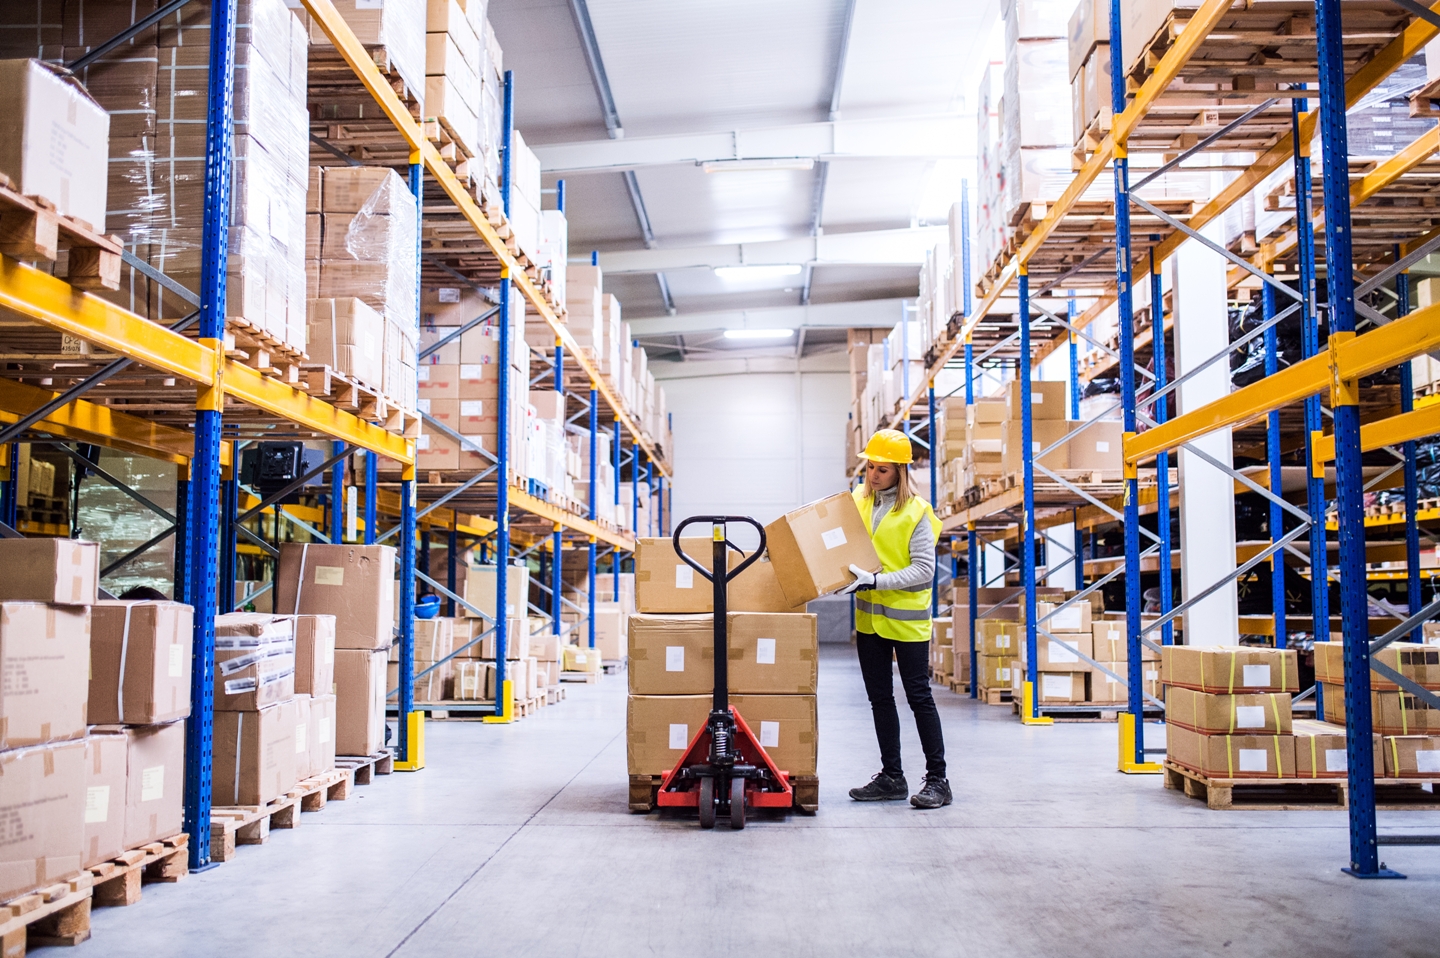 Buying direct from manufacturers doesn’t guarantee supply chain compliance